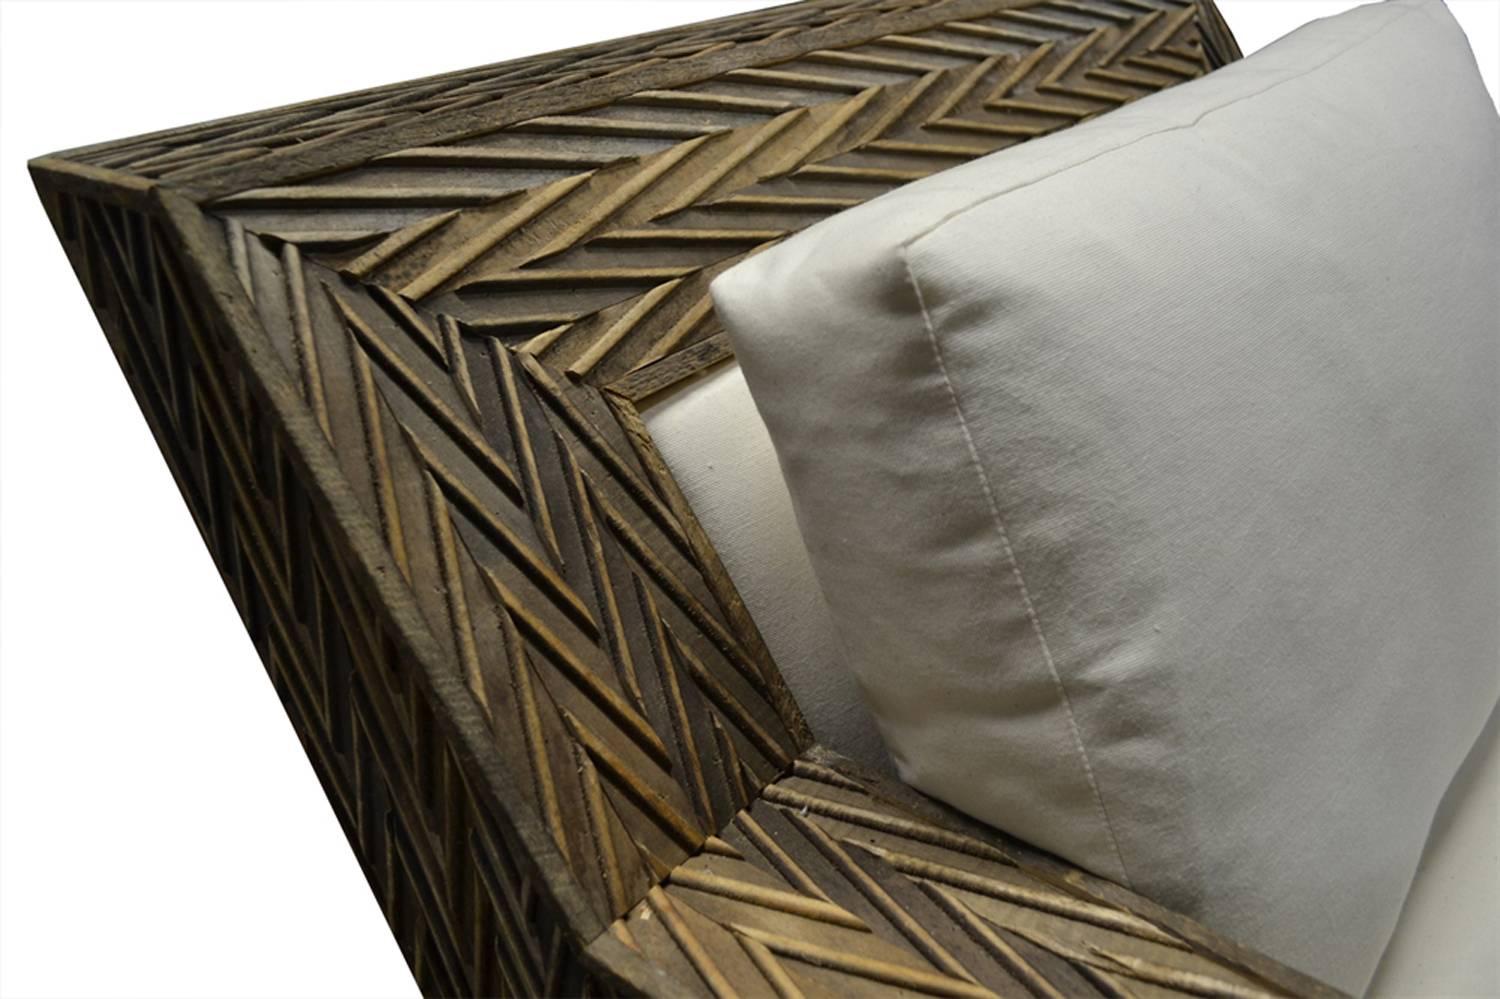 The Chevron Lounge Chair is an original design by Joann Westwater. The deeply angled frame of this decorative chair is finished in our Chevron surface covering, made of old beaded timbers. The chairs have the comfy 